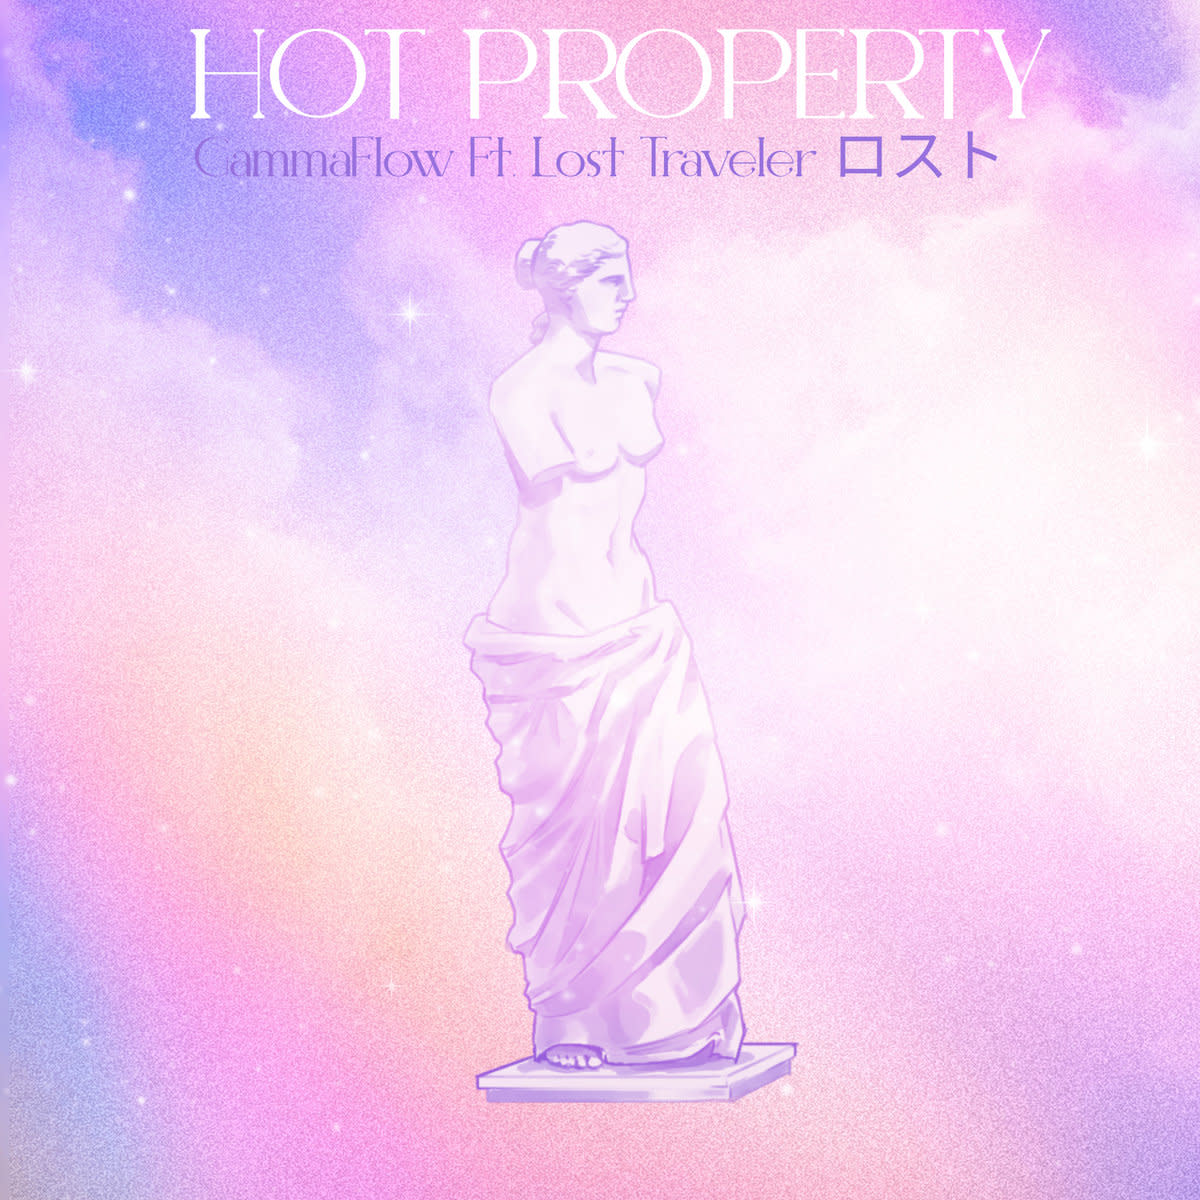 Synth Single Review: “Hot Property” by GammaFlow & Lost Traveler ロスト